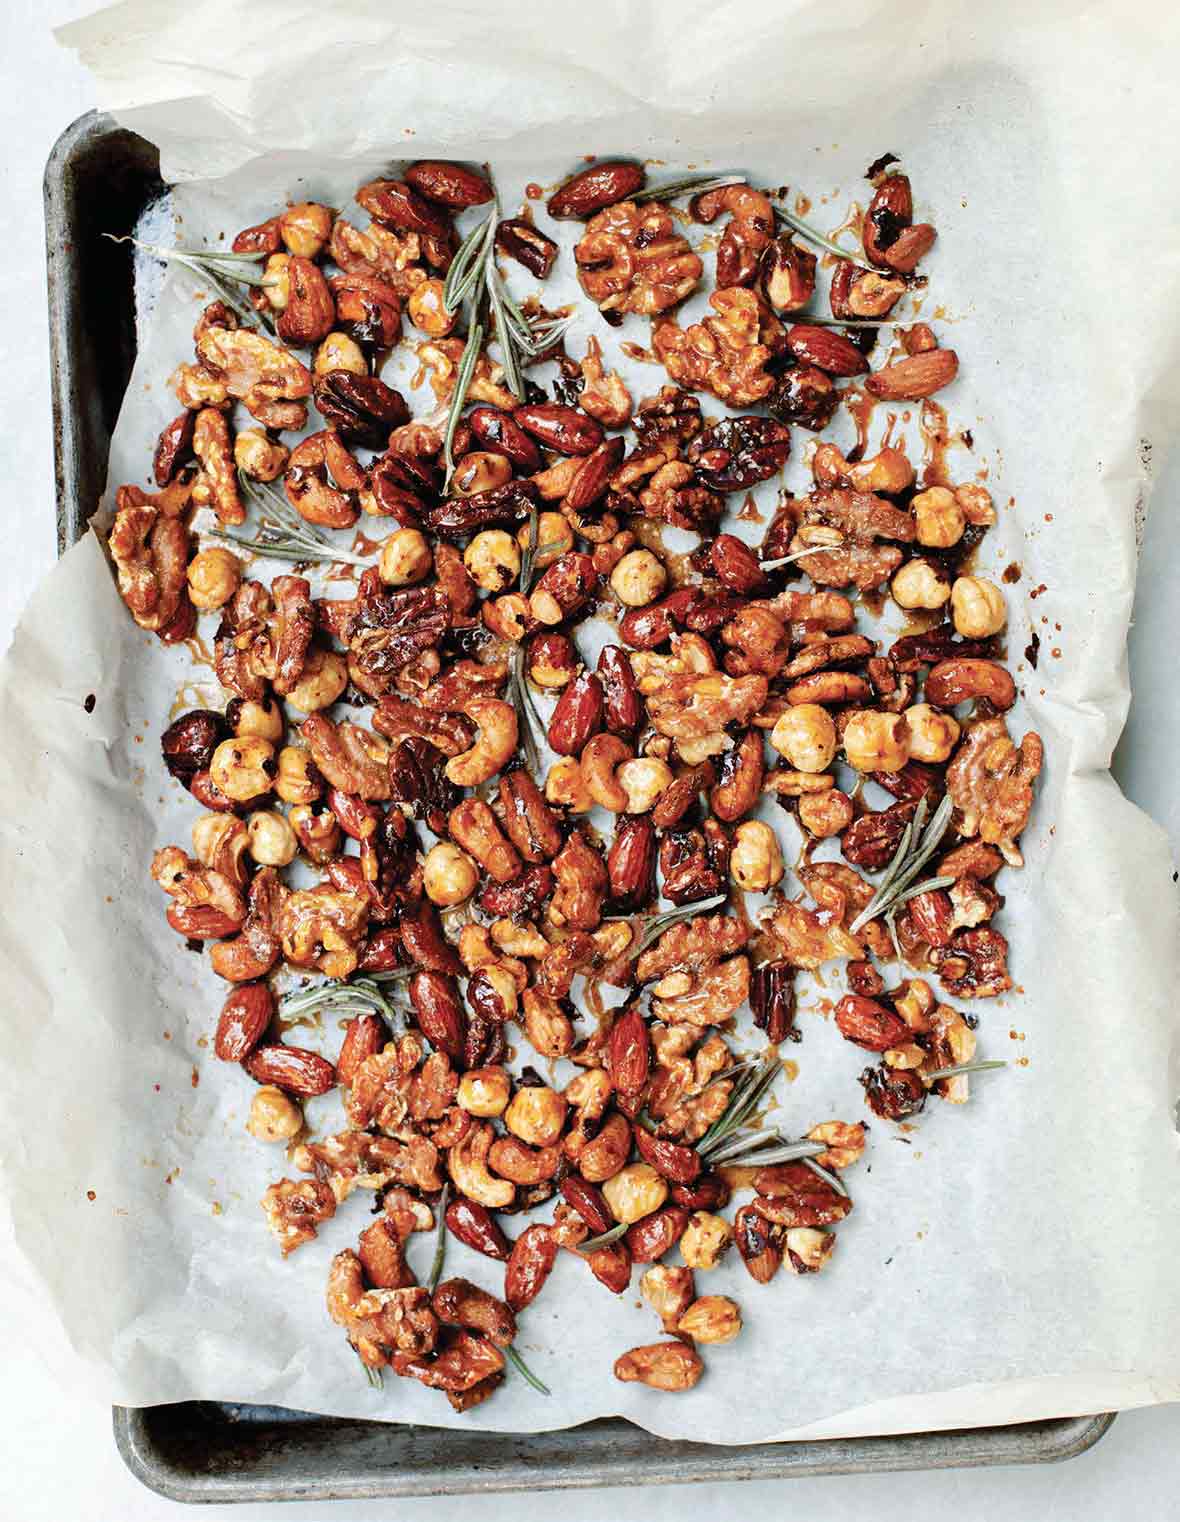 A layer of assorted nuts and rosemary sprigs on a sheet of parchment paper resting in a sheet pan